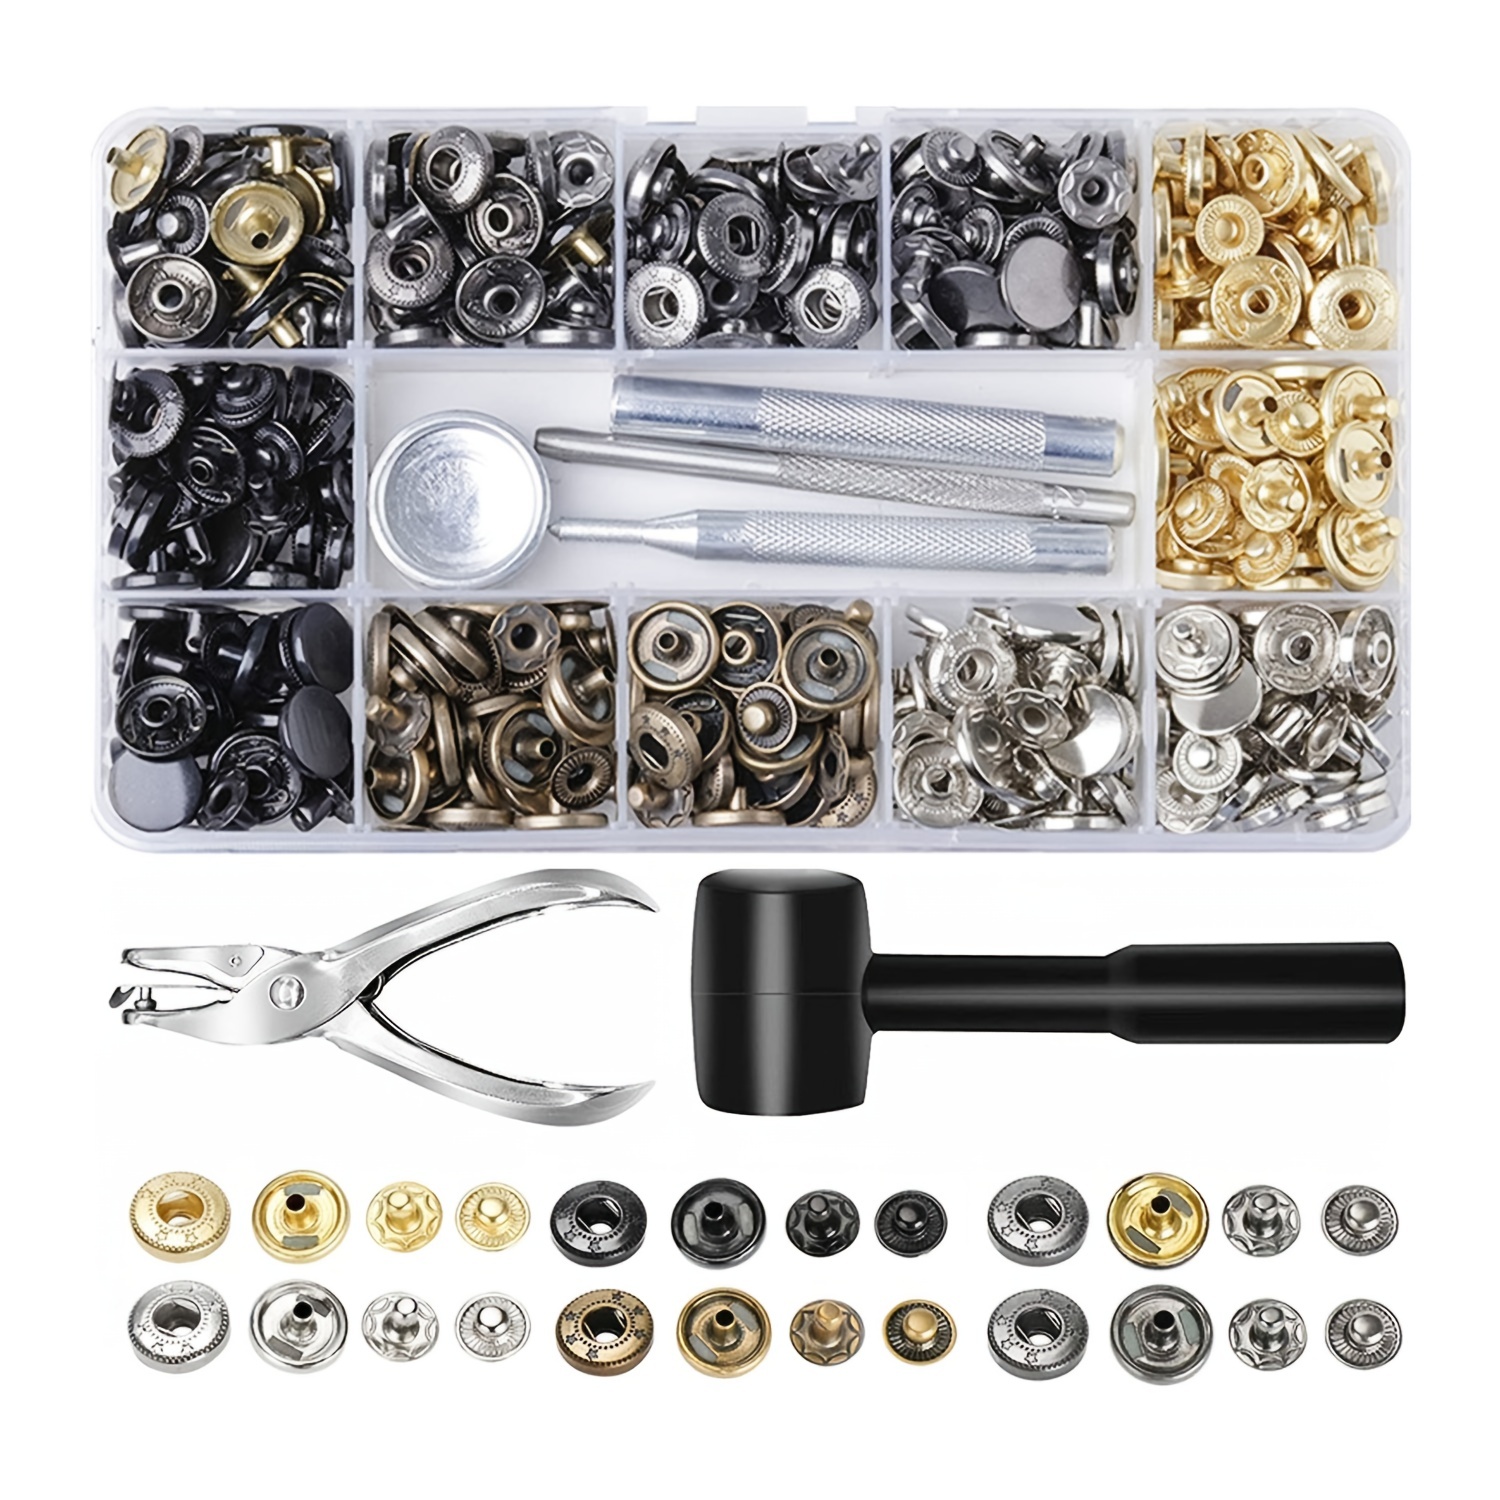 50 Sets Brass Material Fashion Spring Metal Snapsleatherworking Snap Buttons  Metal Snap Fasteners Kit Leather Snaps Heavy Duty Snaps Kits -  Hong  Kong